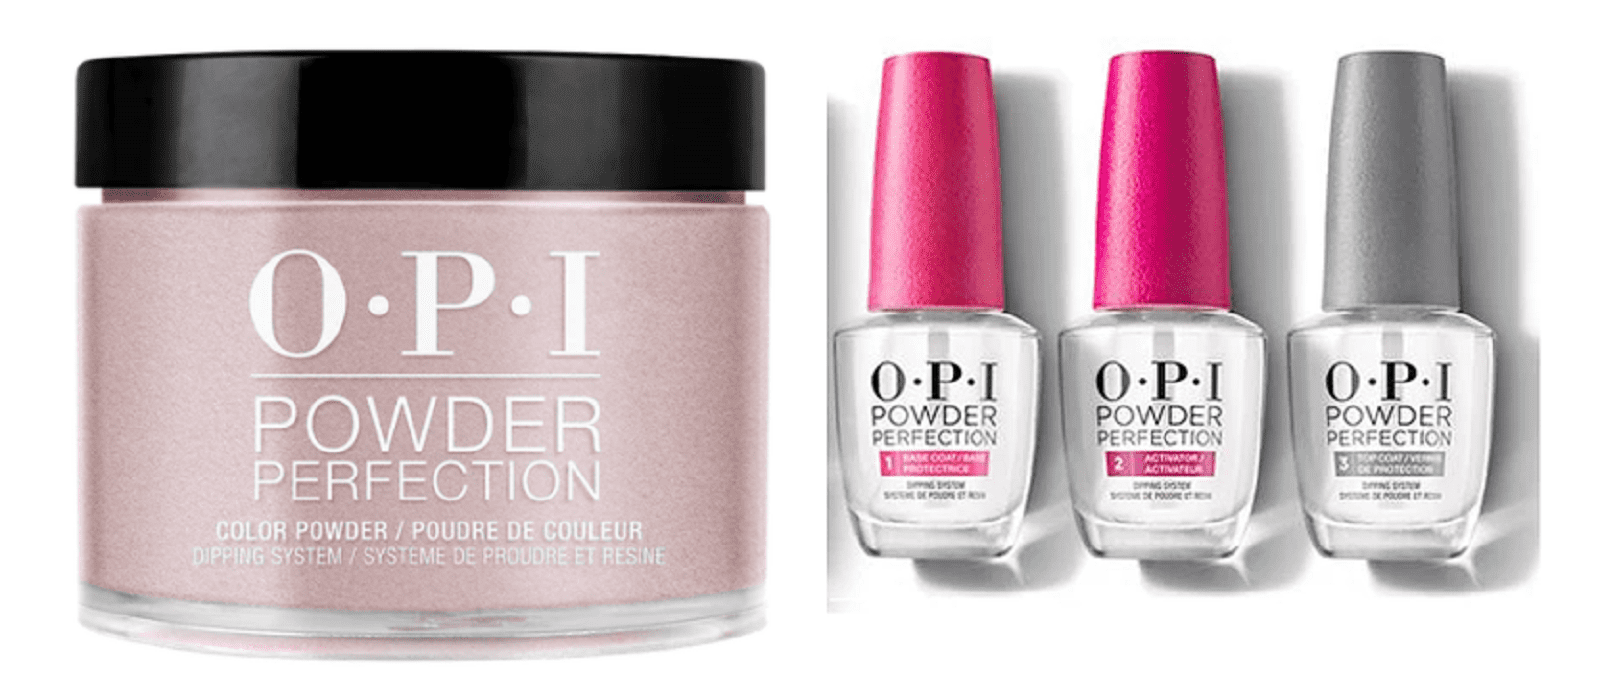 6. OPI Powder Perfection - wide 4